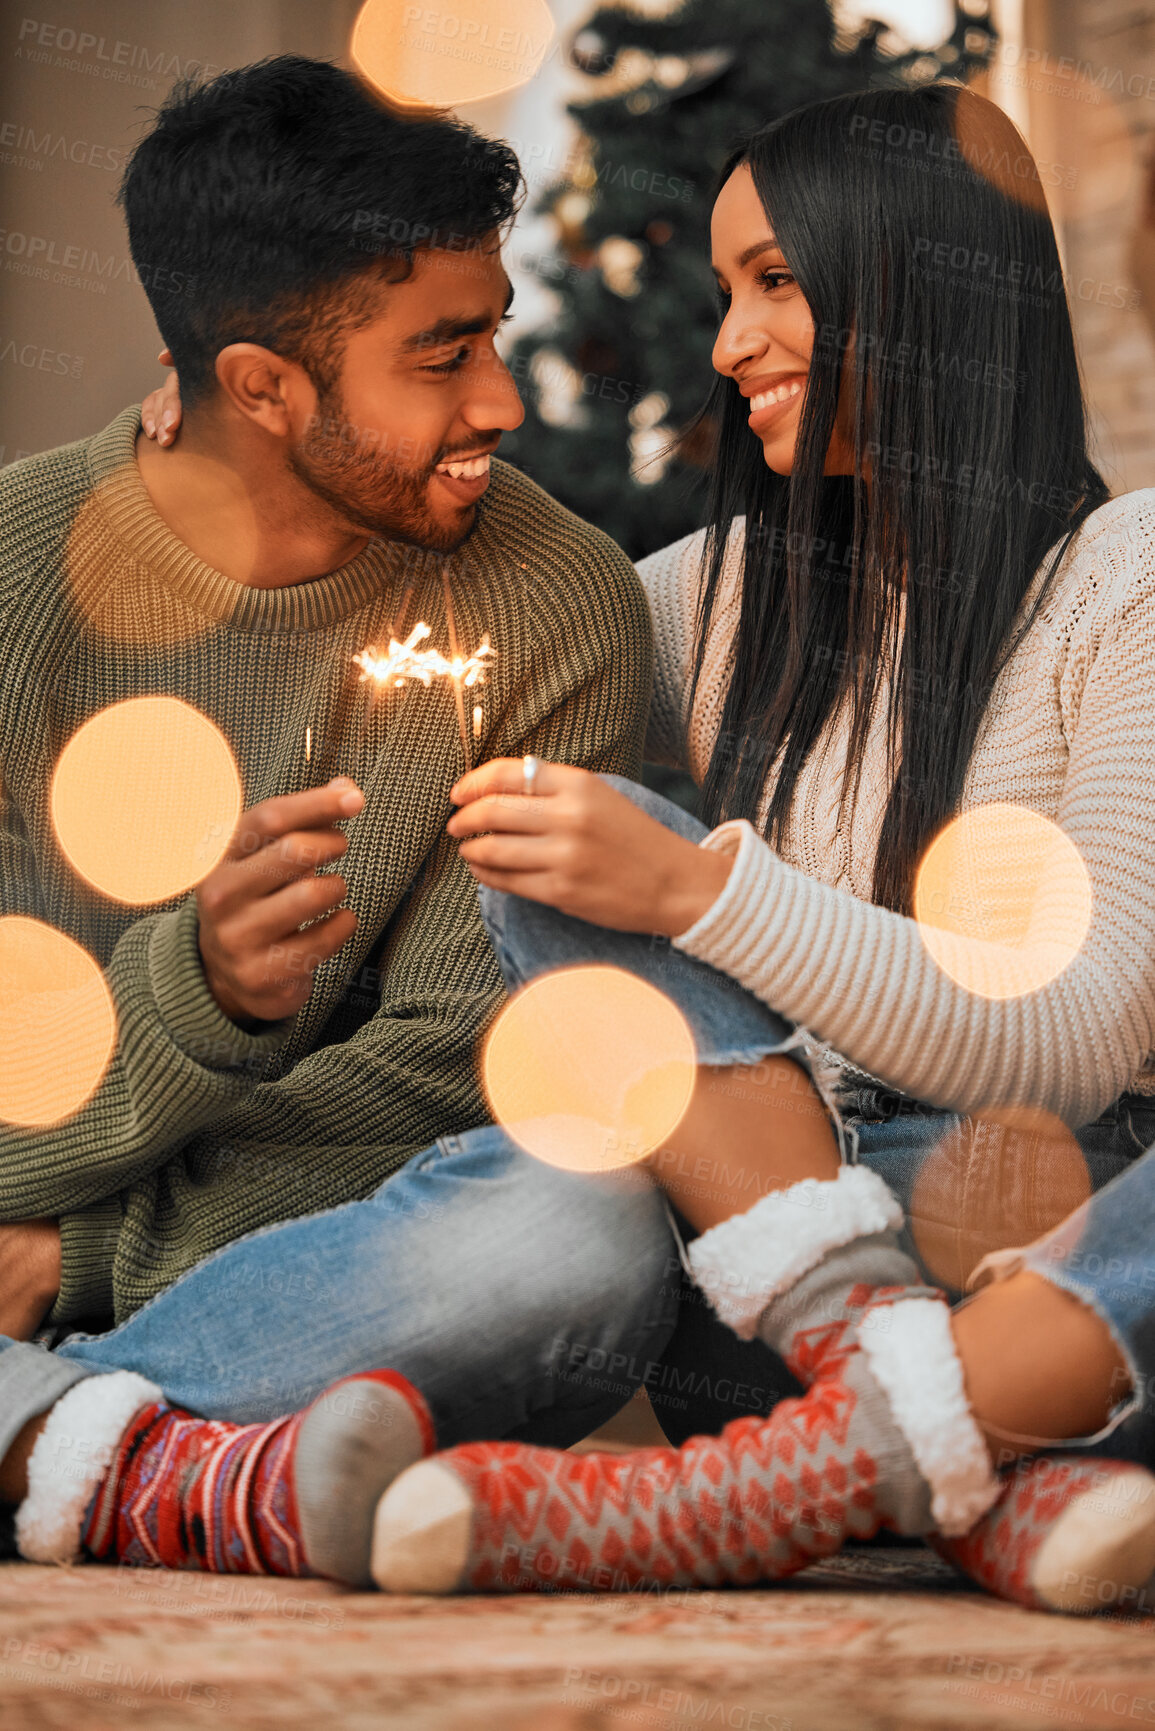 Buy stock photo Shot of a young couple holding sparklers while celebrating Christmas together at home